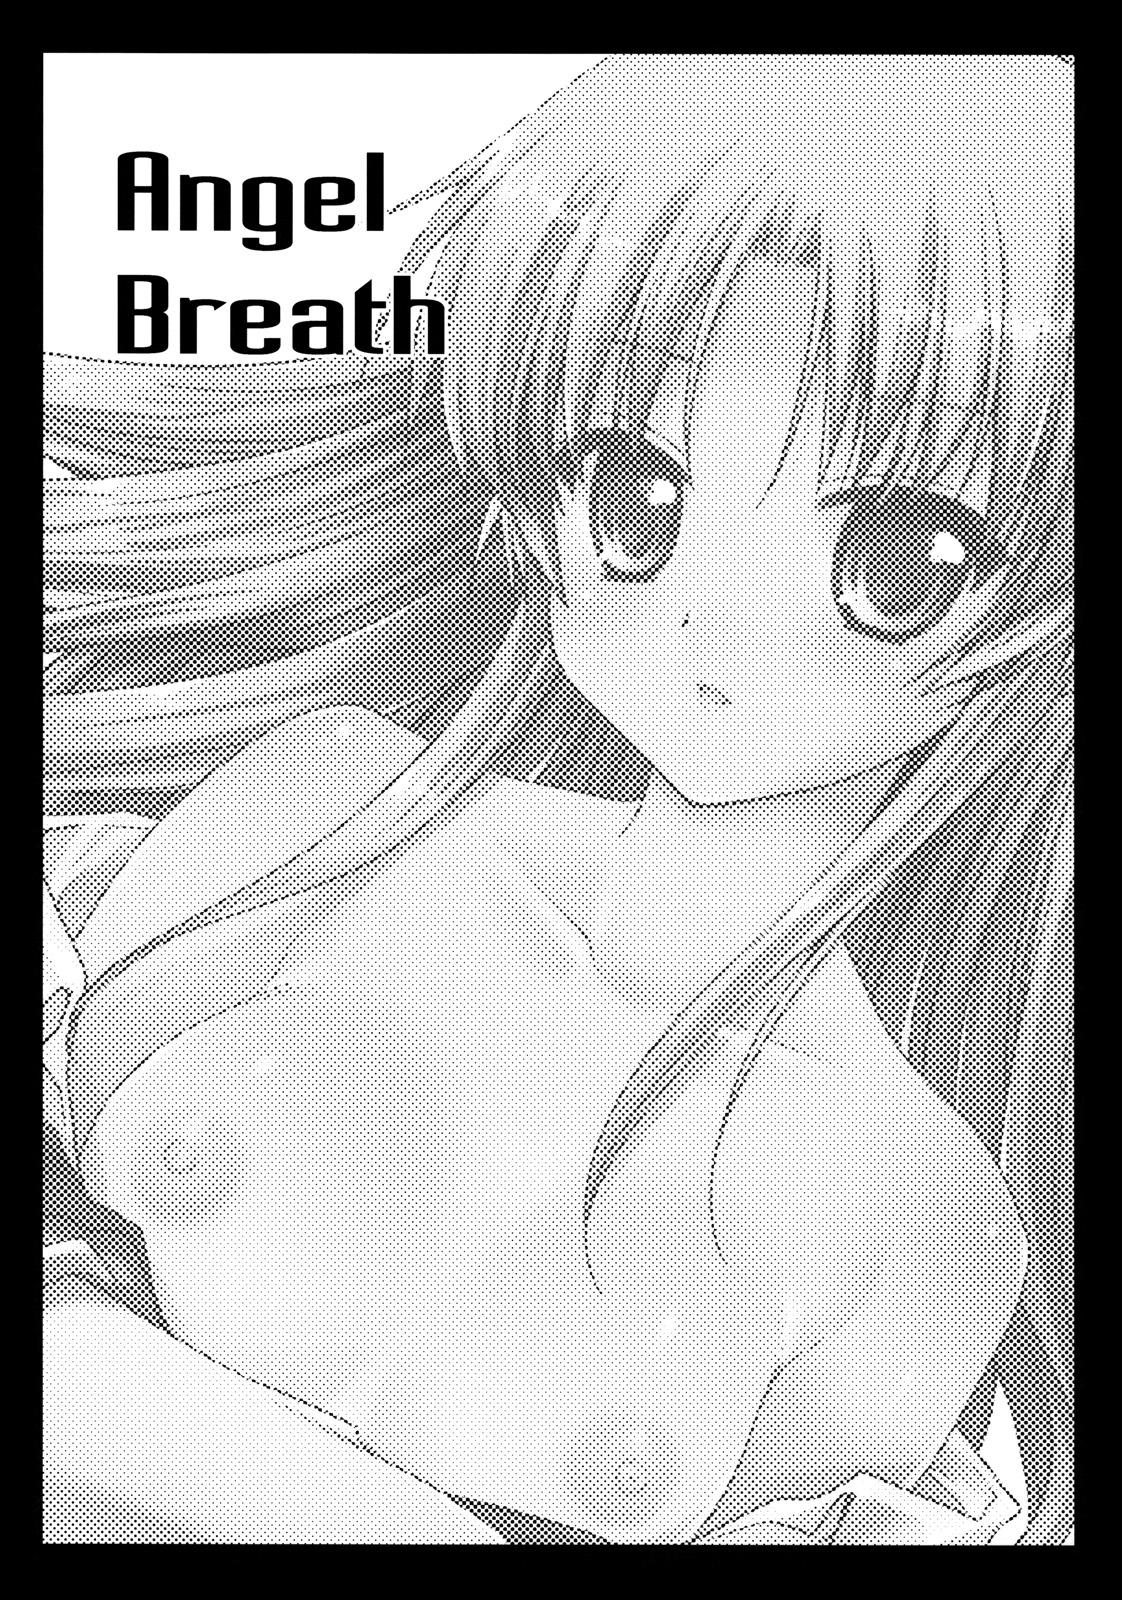 Perfect Butt Angel Breath - Angel beats Black Dick - Page 3